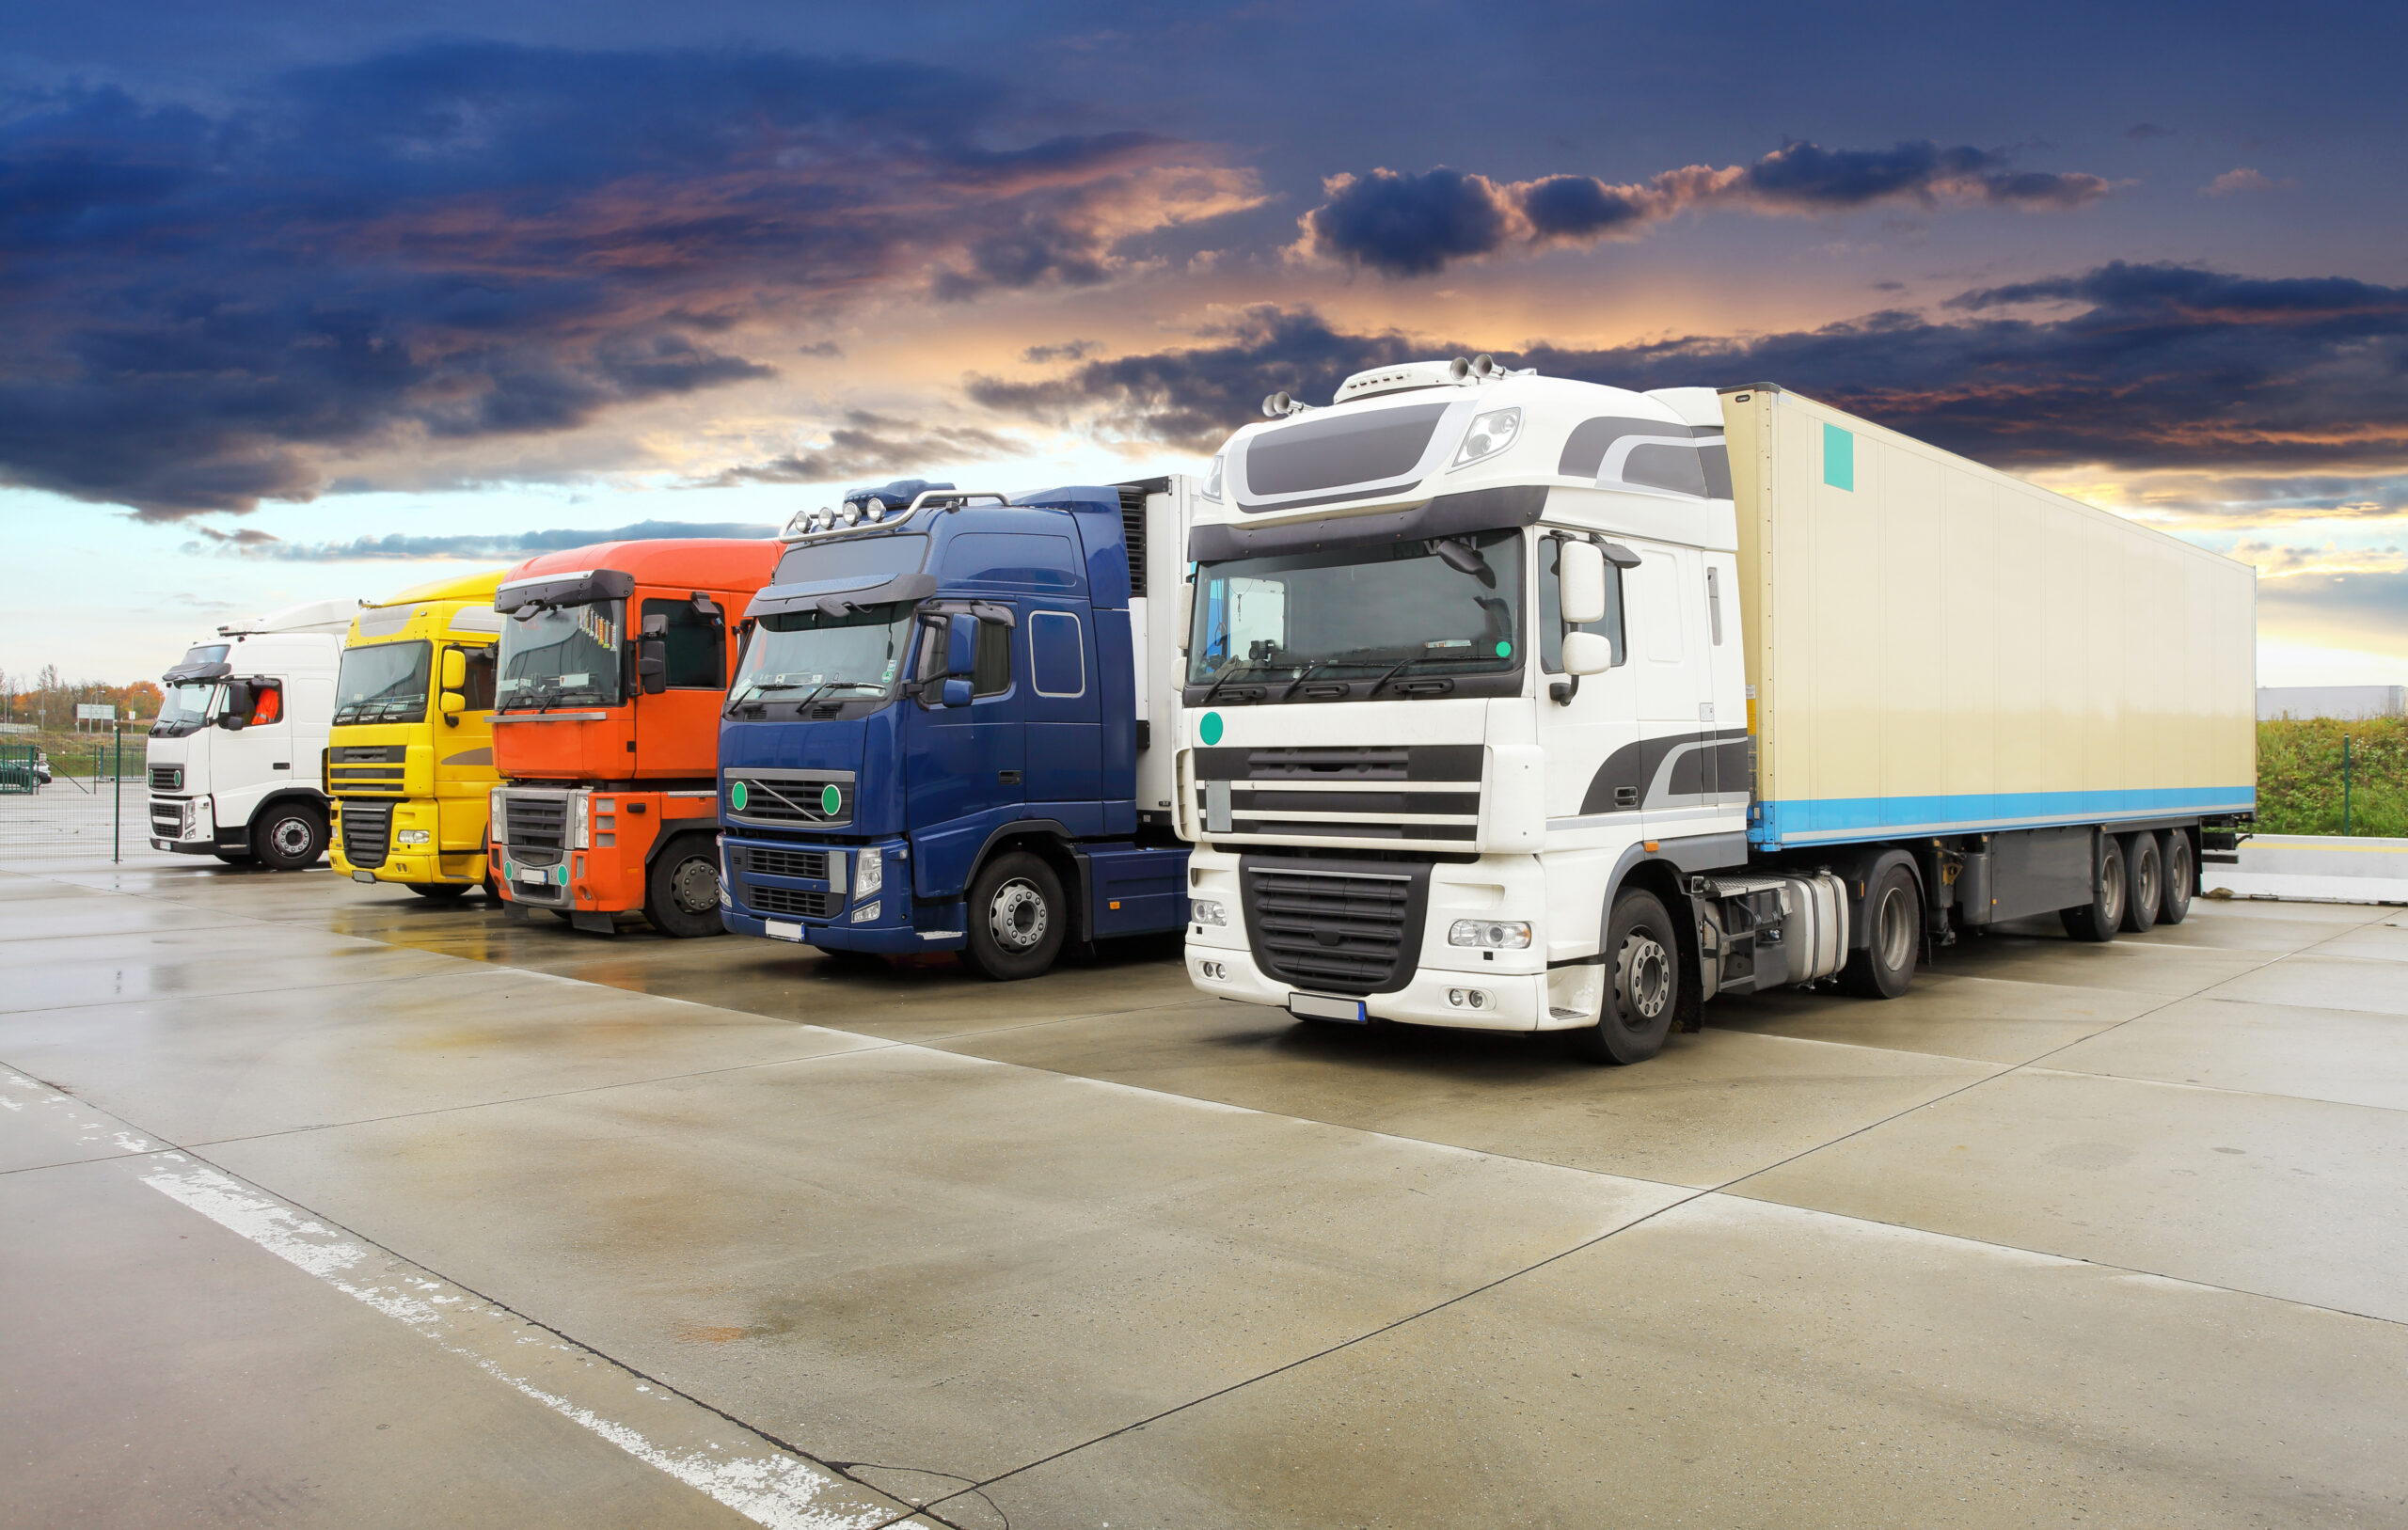 Strong appetite for mergers and acquisition in UK logistics sector, data shows